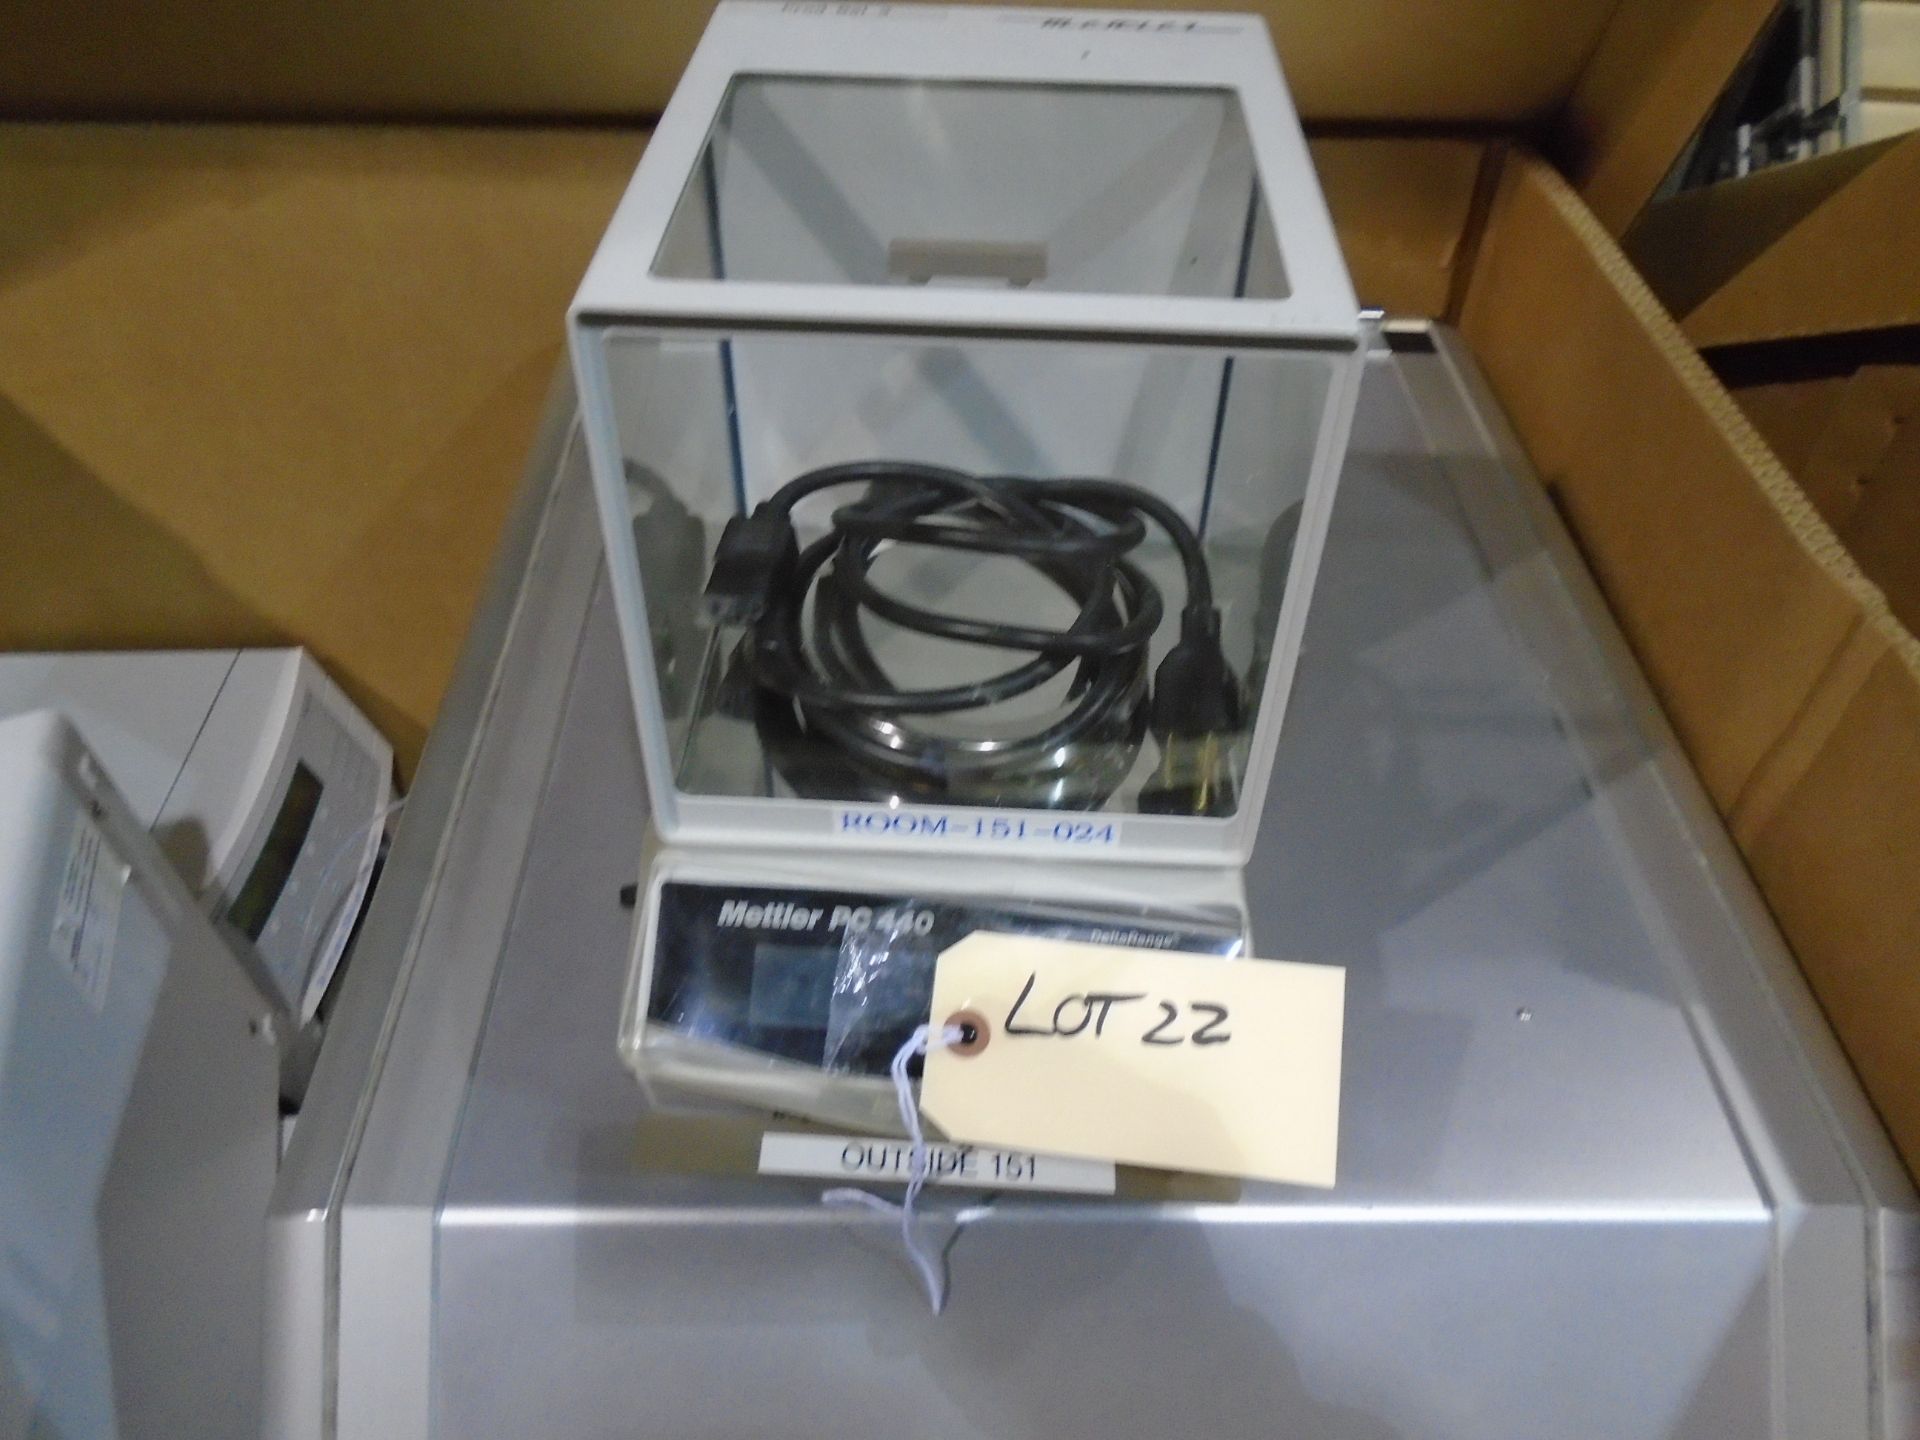 METTLER DIGITAL LAB SCALE PC440 LOAD OUT FEE:10